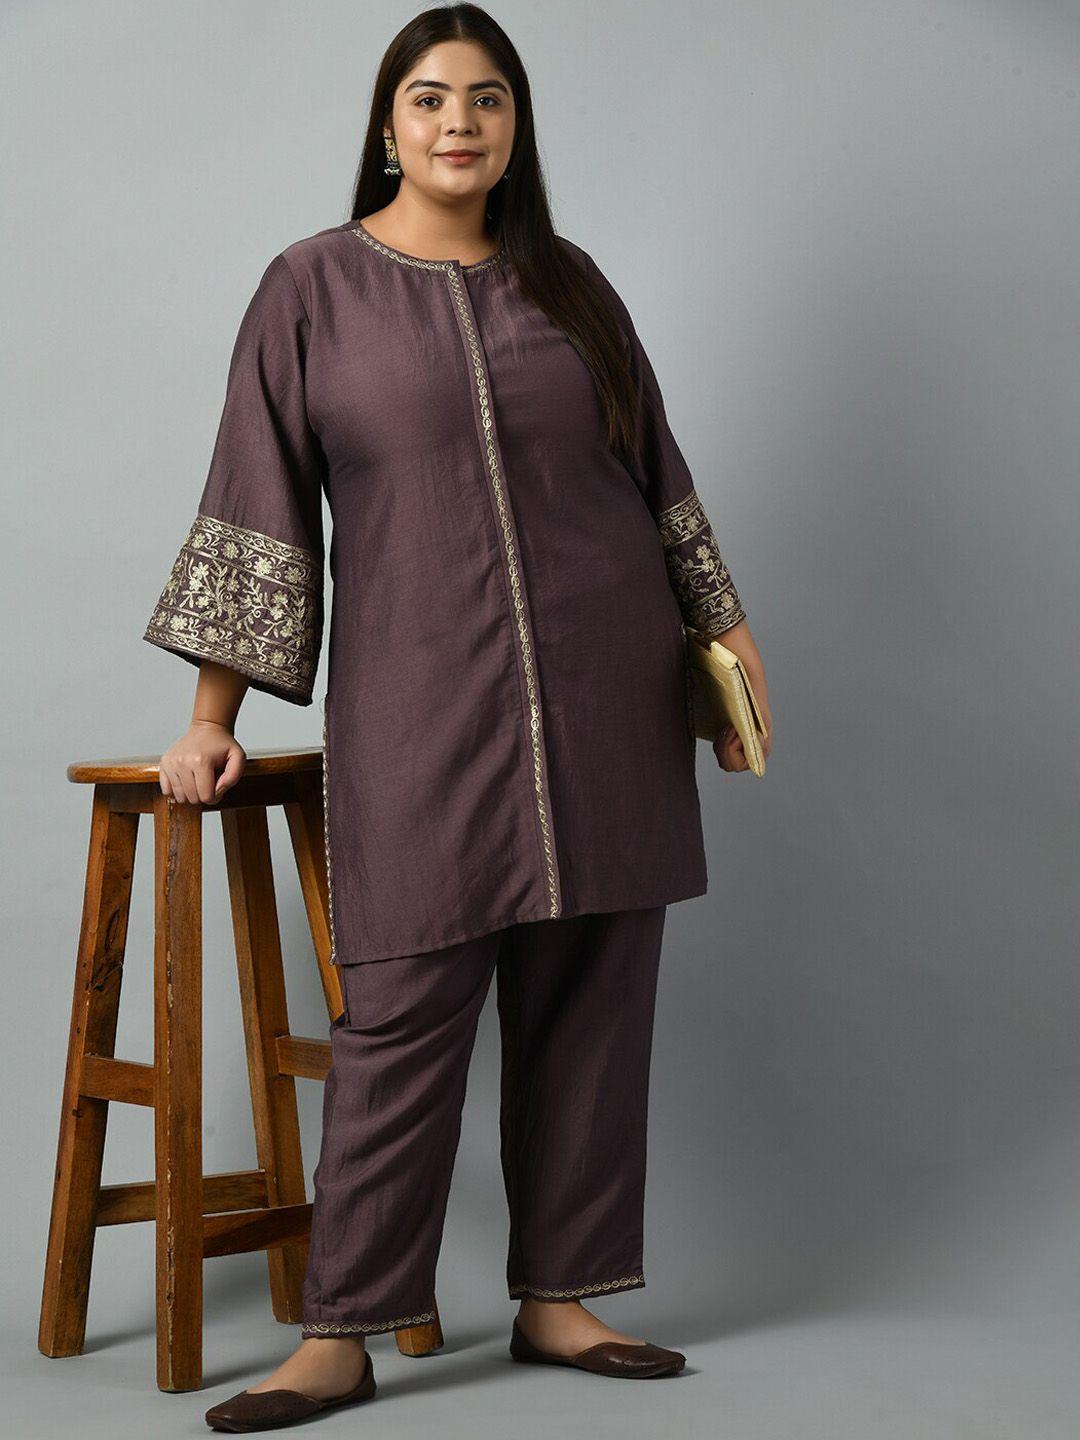 prettyplus by desinoor.com plus size floral embroidered flared sleeves kurta with palazzos